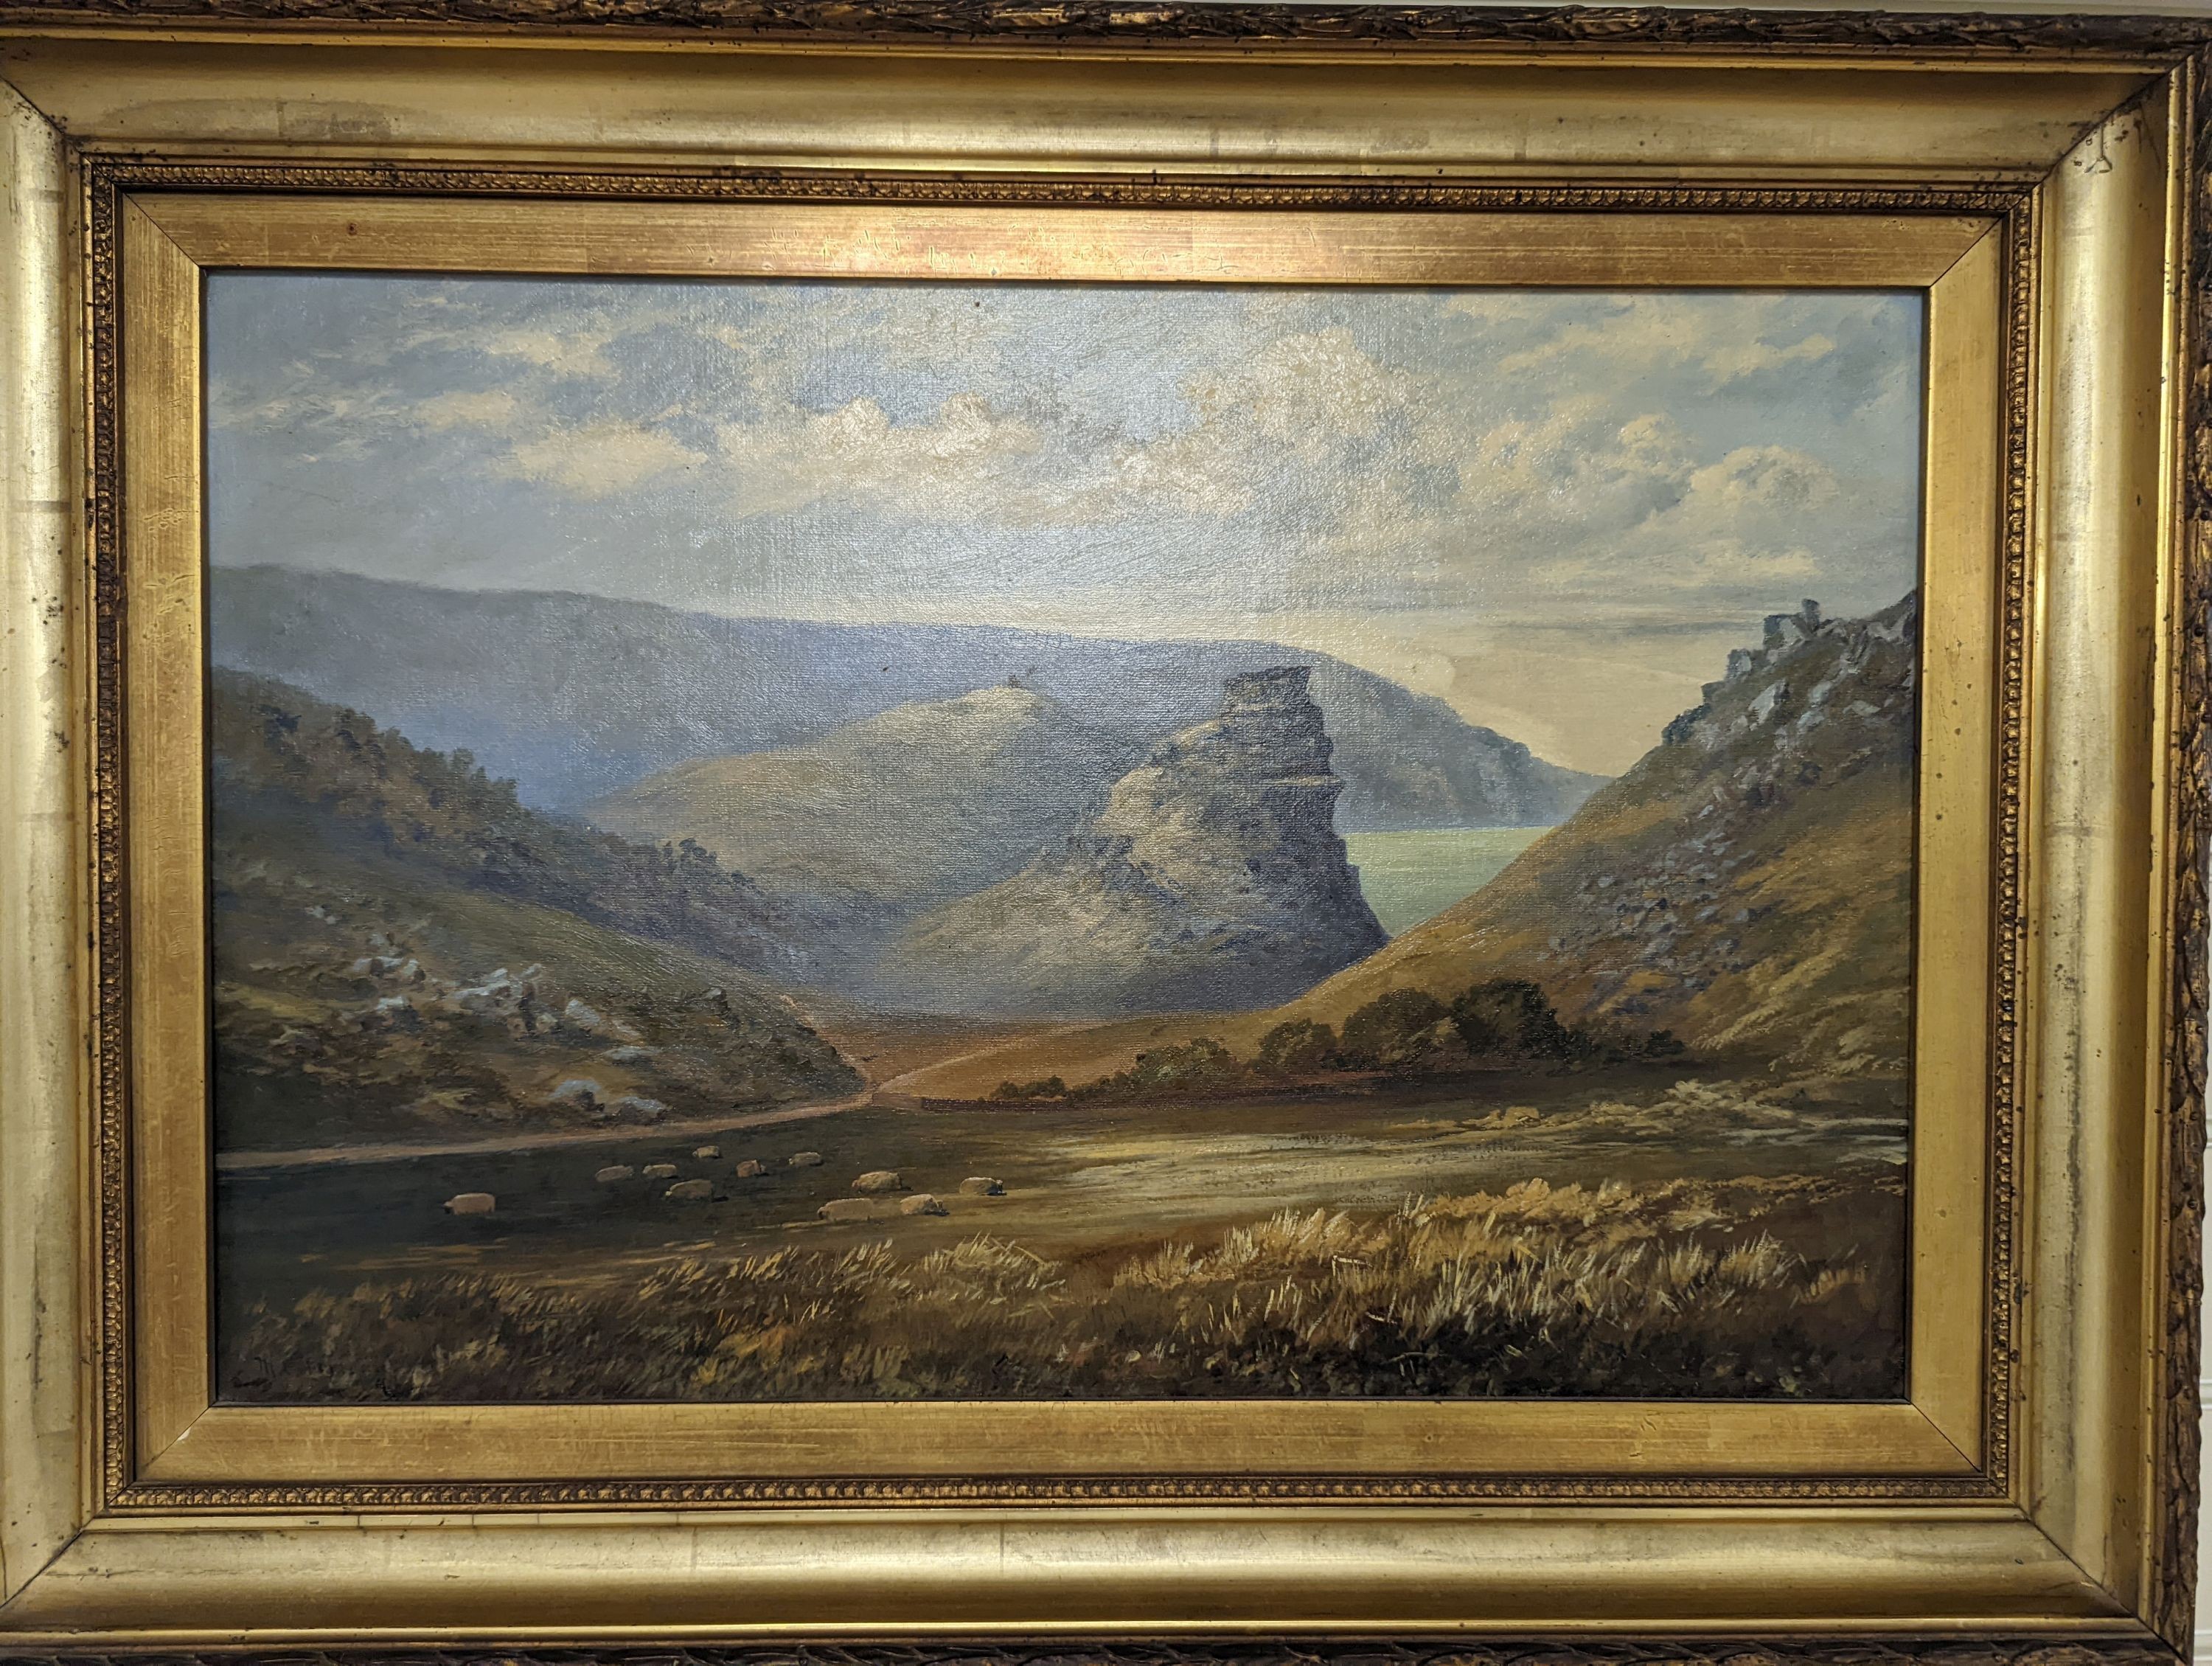 M.A. Perreau Fl. 19th century, oil on canvas, Valley of the Rocks, Lynton, North Devon, signed and dated 92, 34 x 52cm